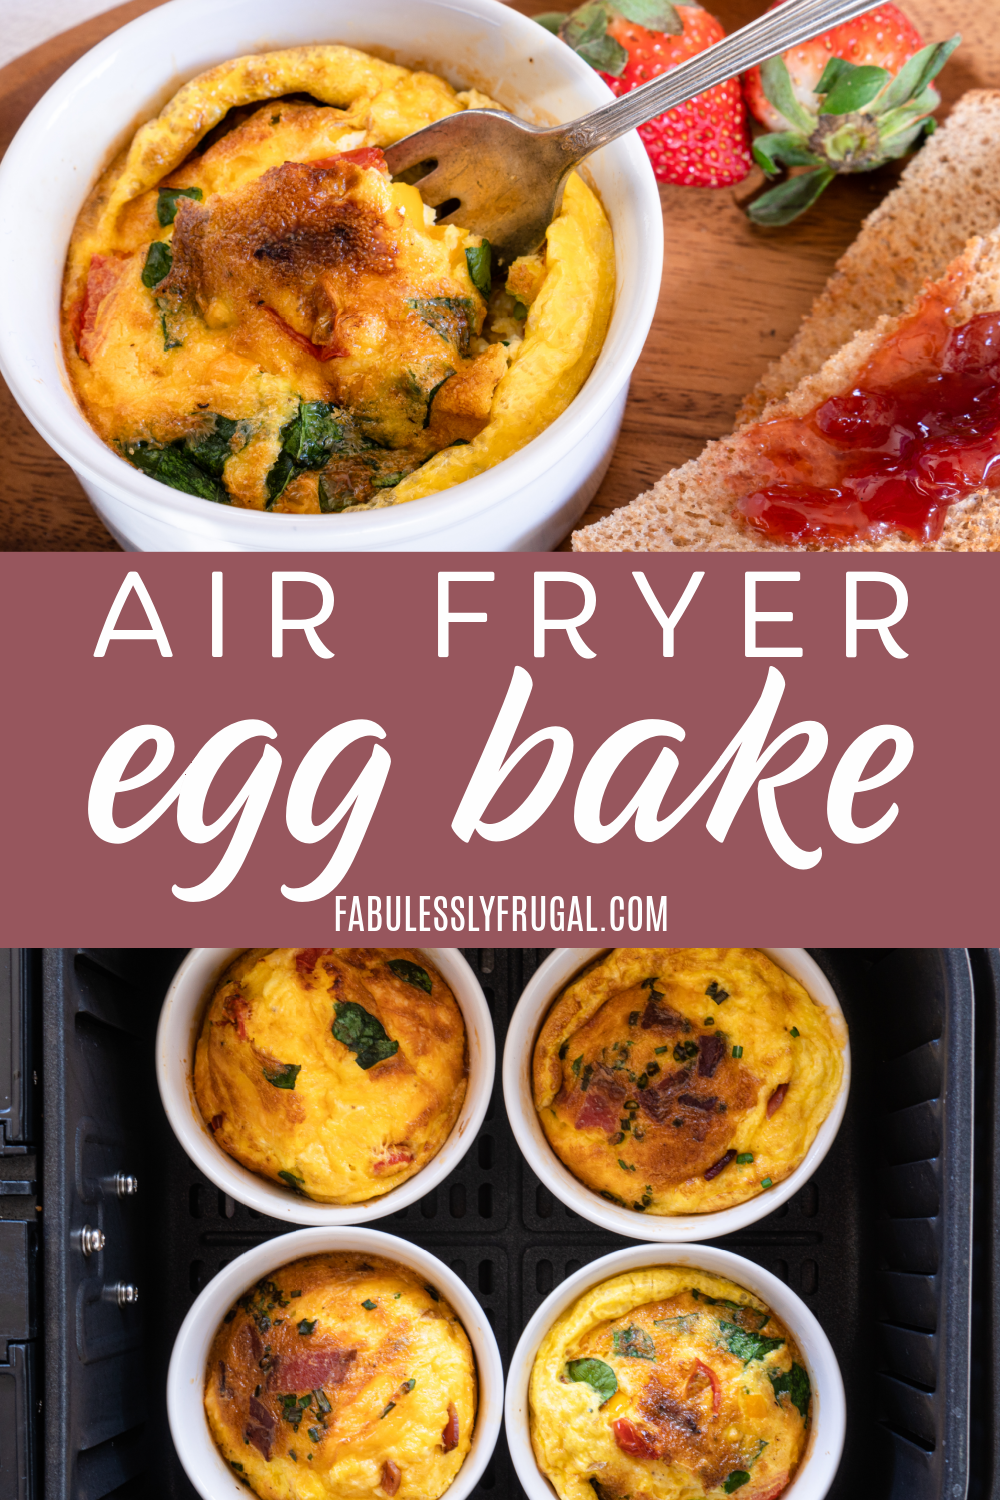 Try this egg bake in the recipe. Not only is it quick and easy, but so delicious and fun to make too!